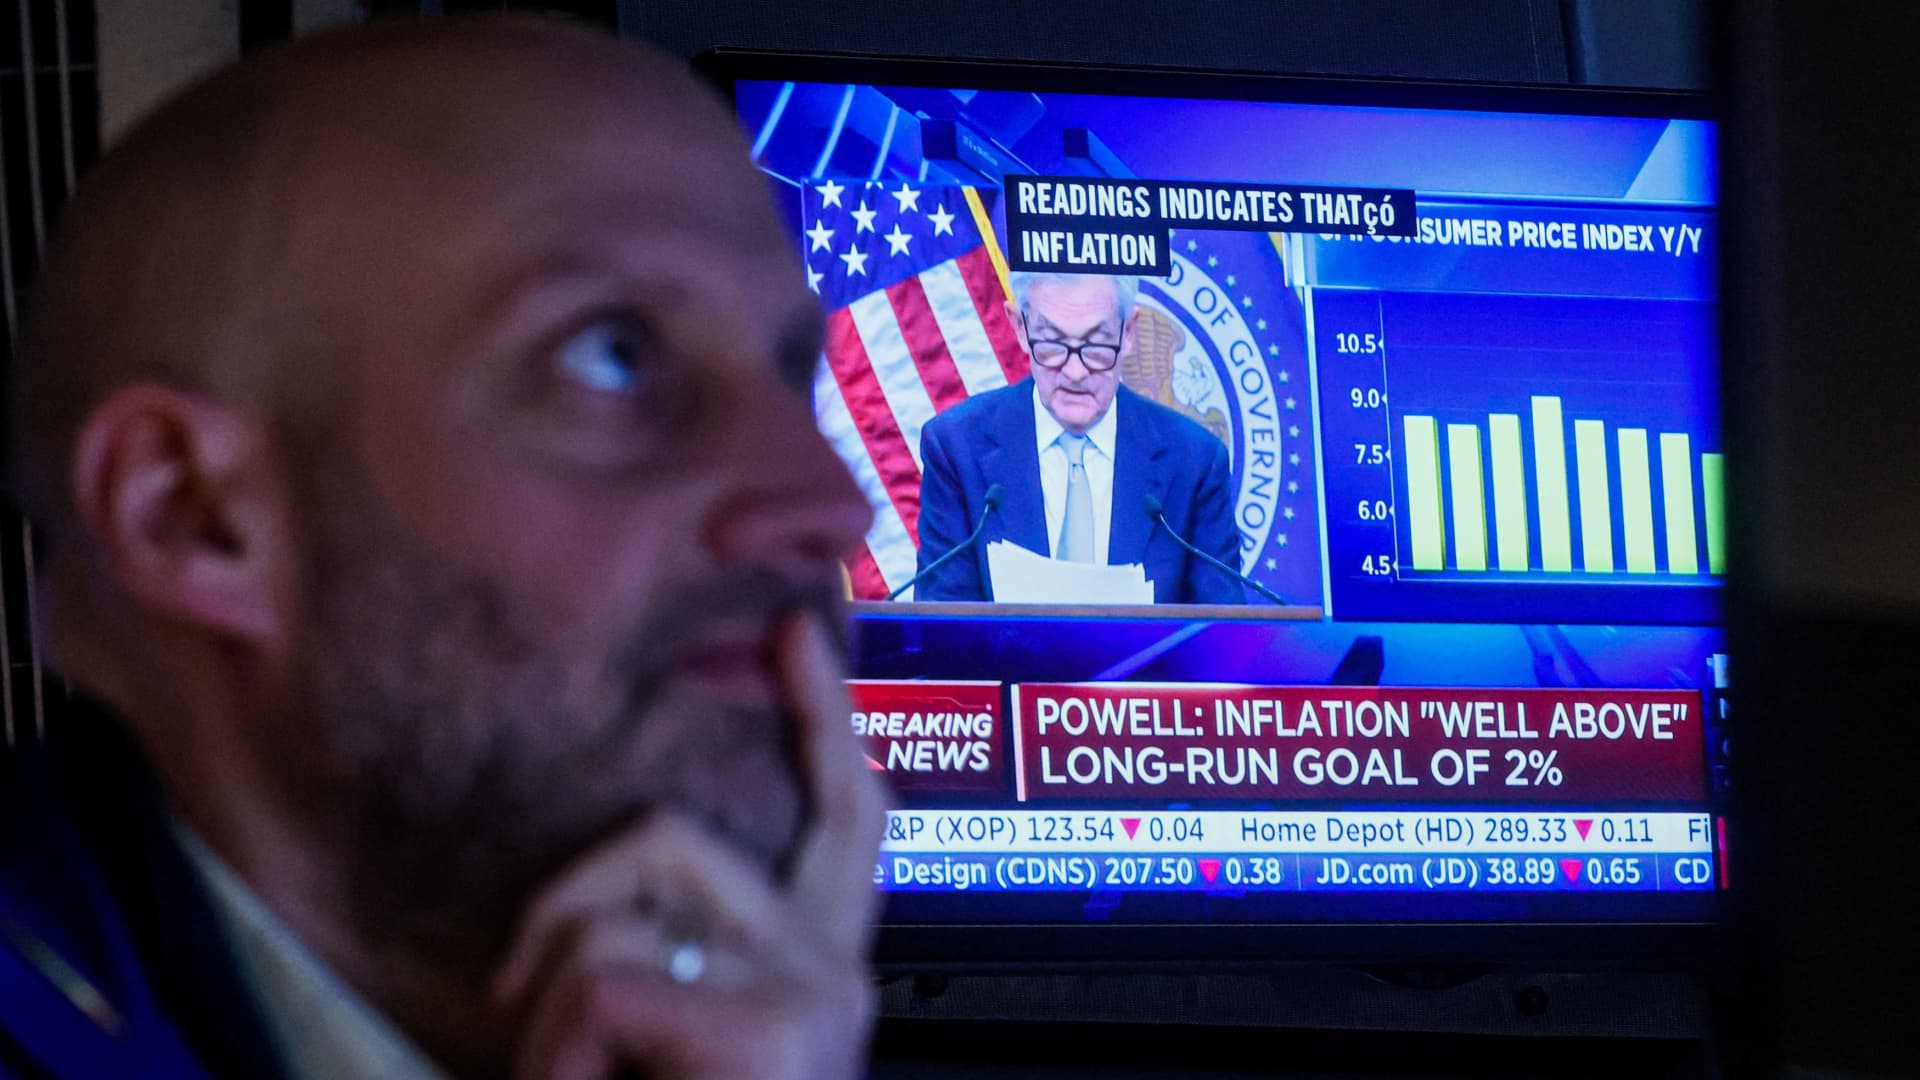 Markets saw a dovish Fed hike but Powell’s warning on credit conditions spooked investors